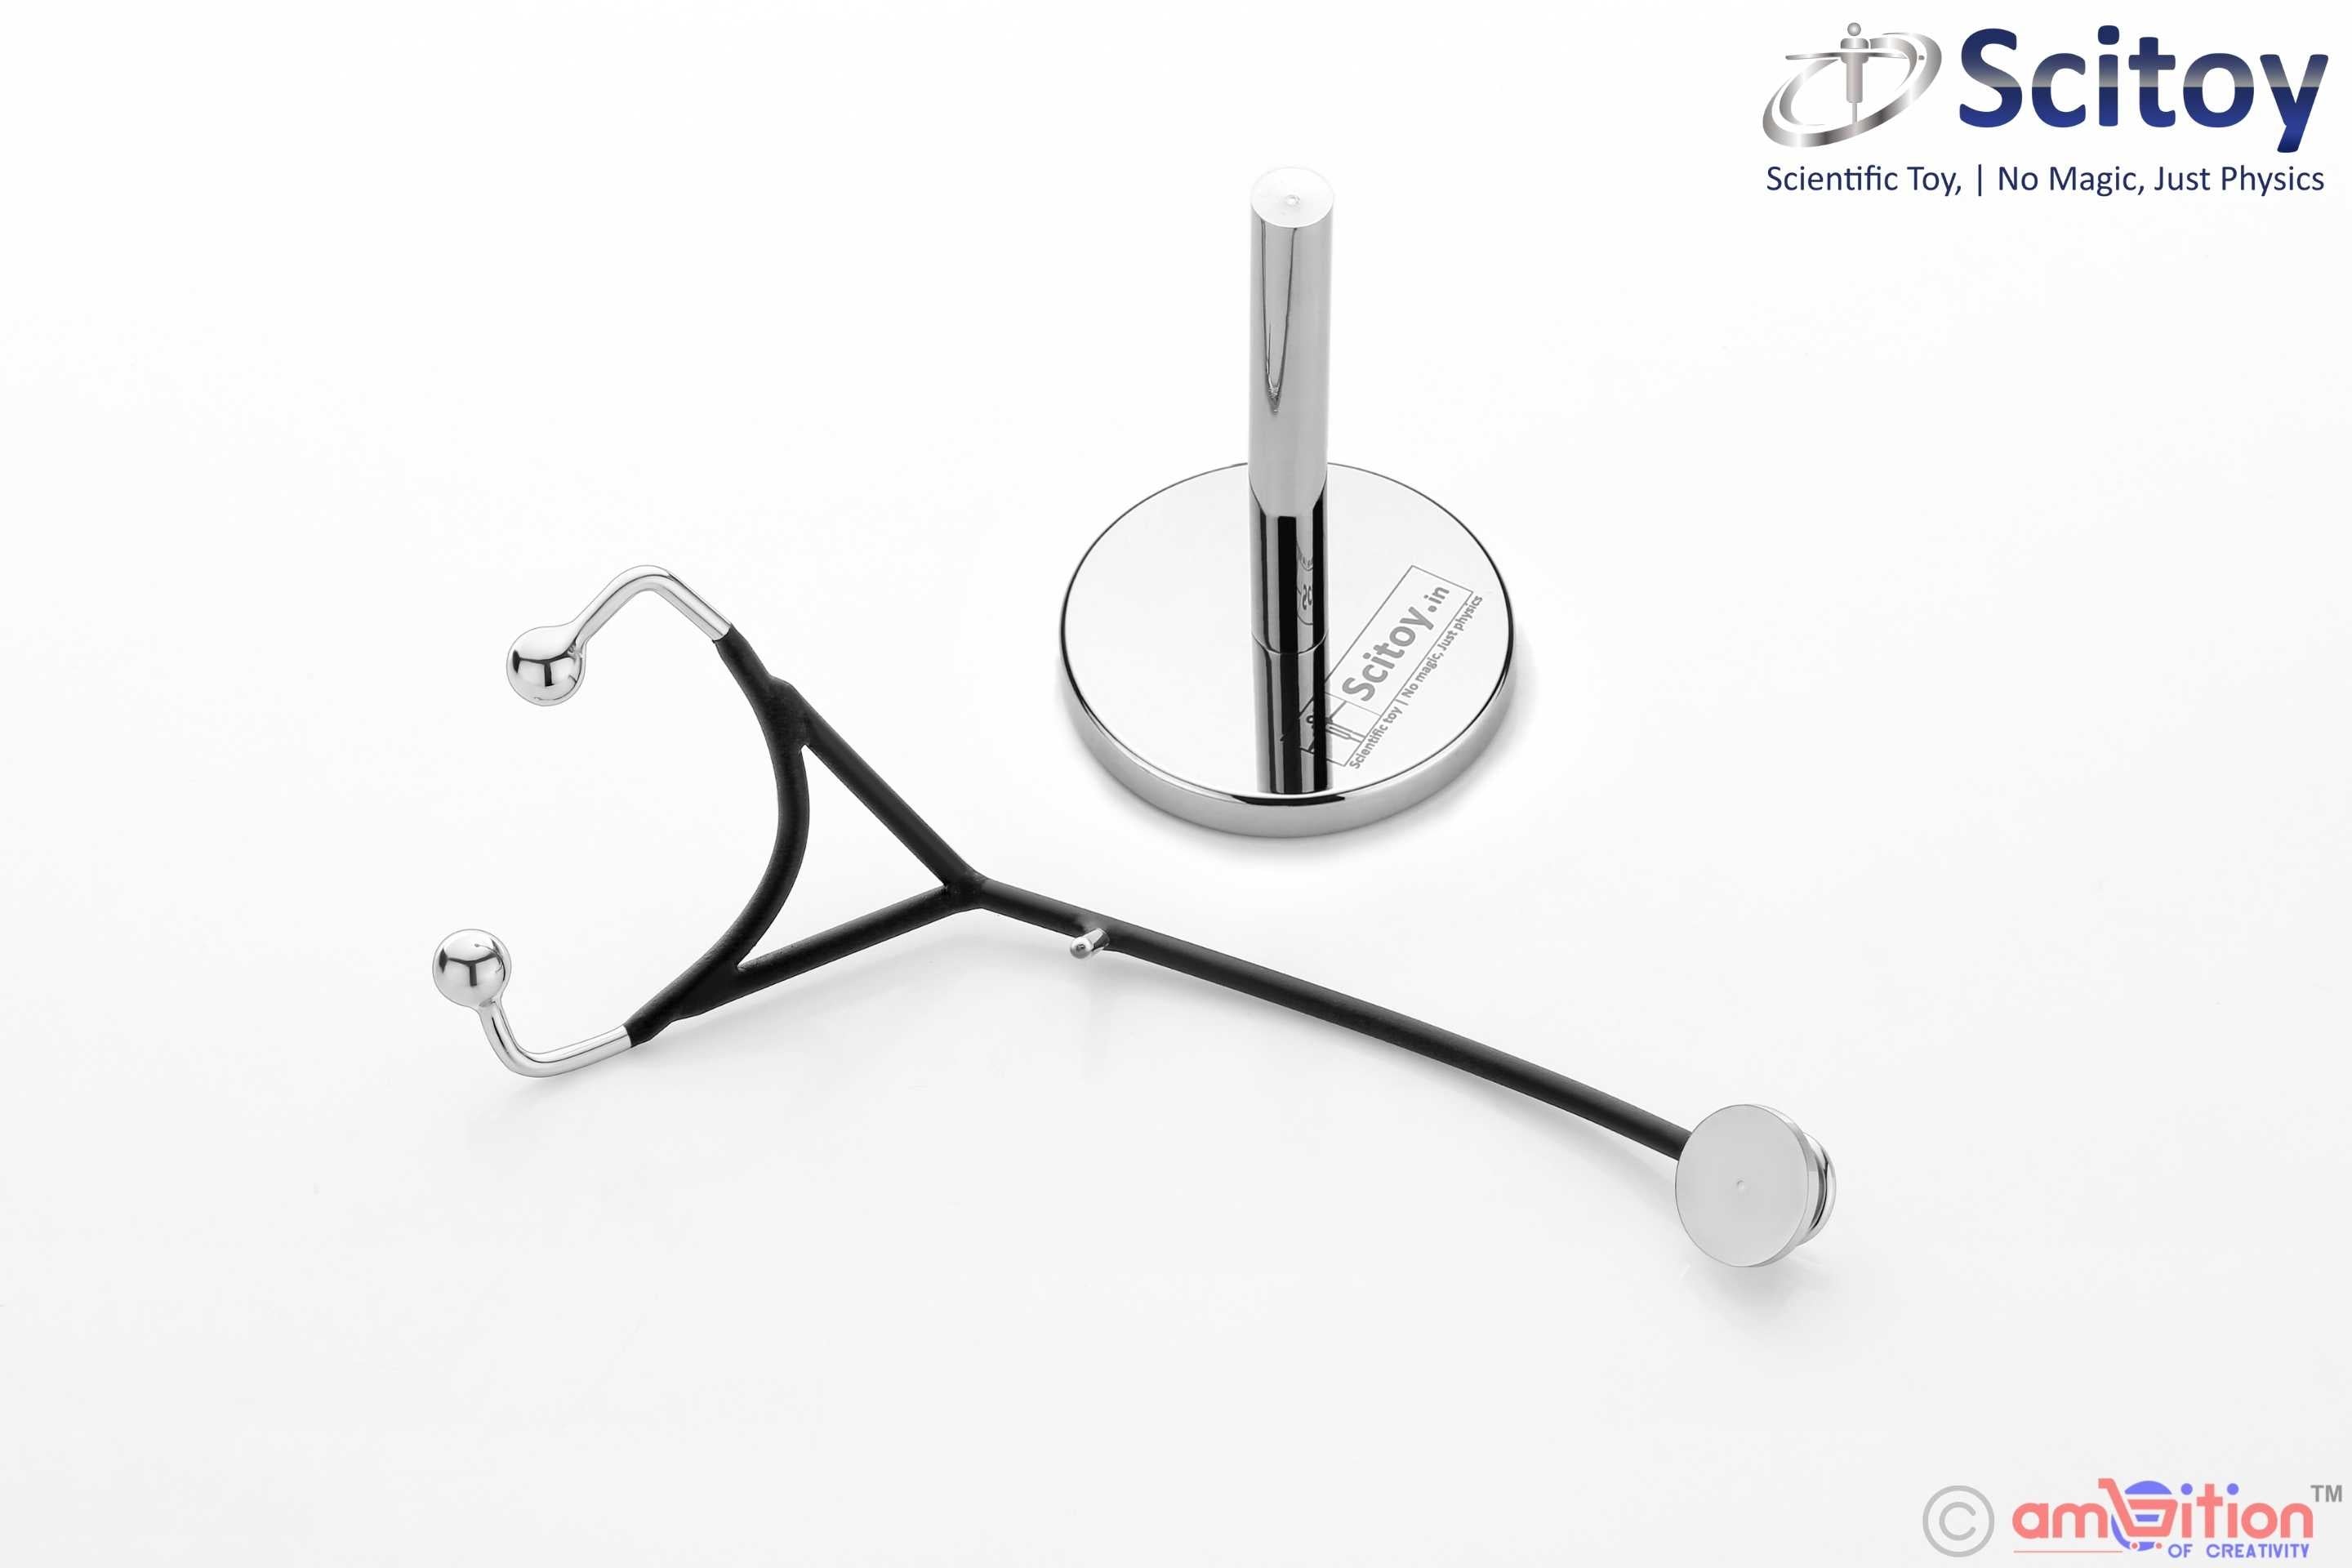 Stainless point balanced stethoscope for Meditation, Entertainment, Office - Home decorations and Gift.